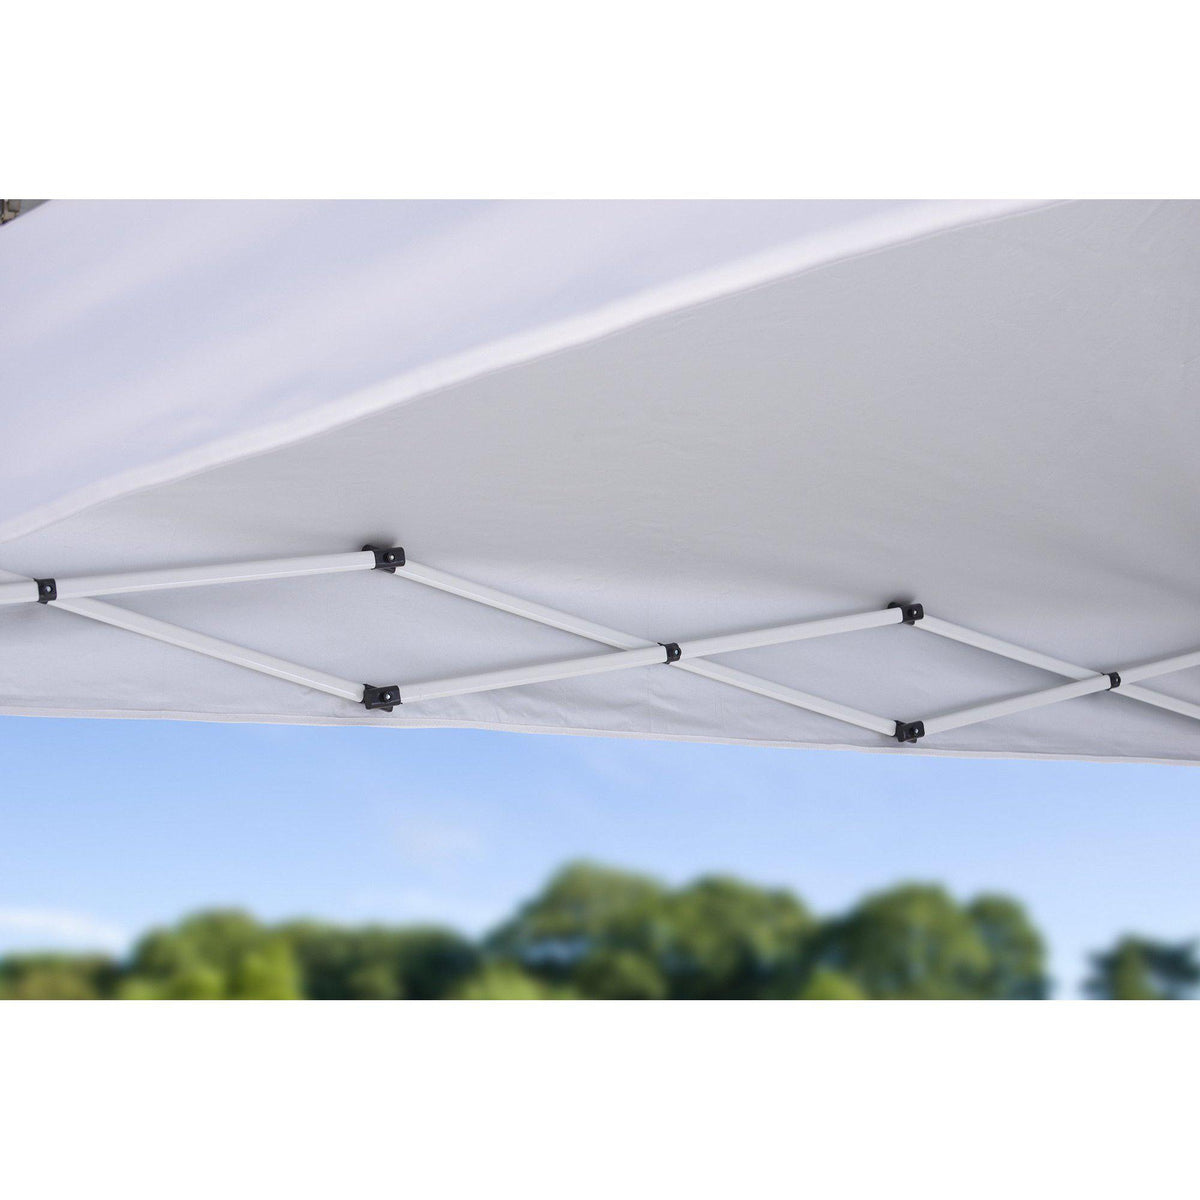 Quik Shade Marketplace MP100 10'x10' Instant Canopy - White